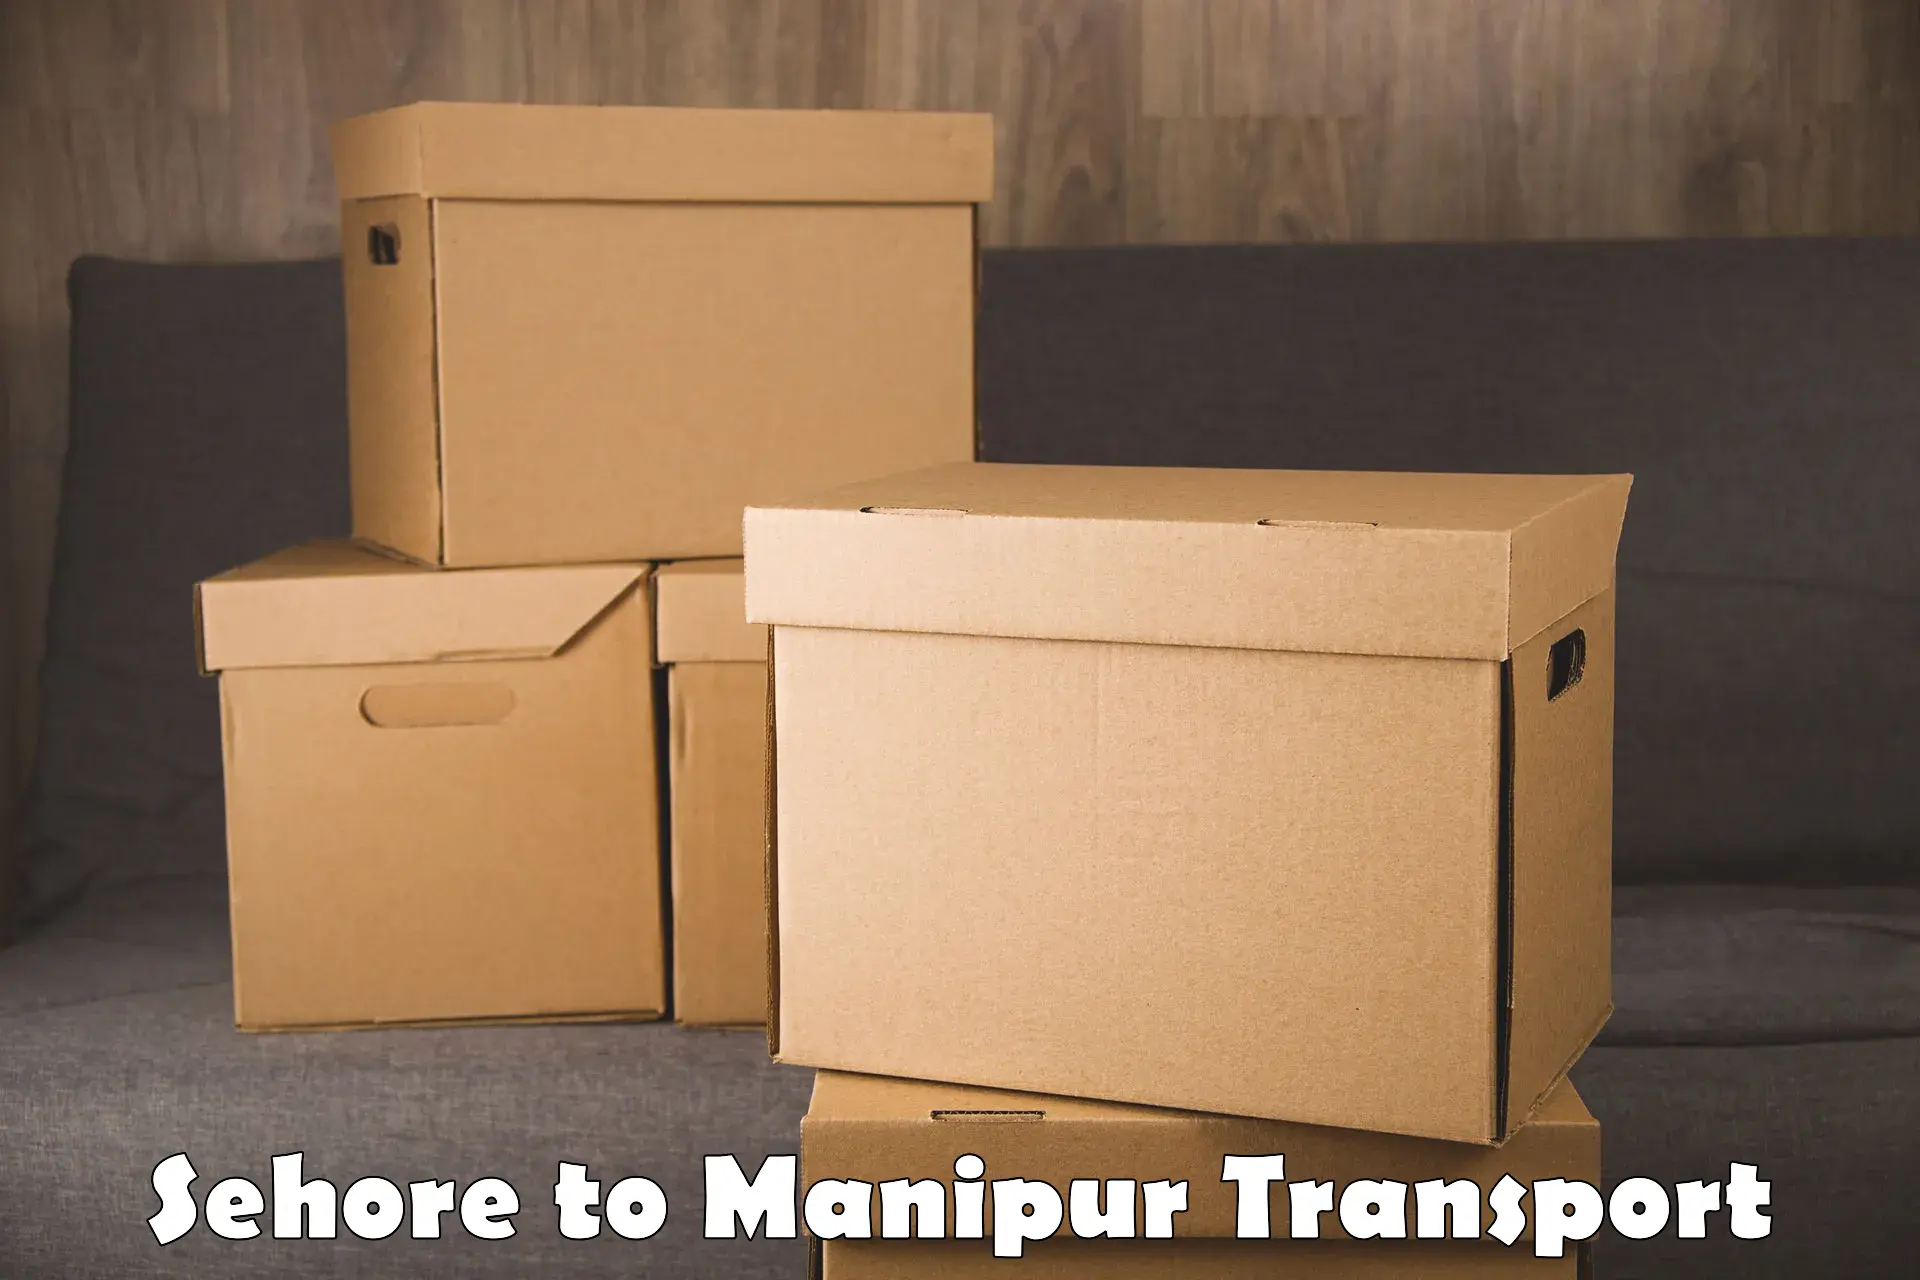 Commercial transport service Sehore to Moirang